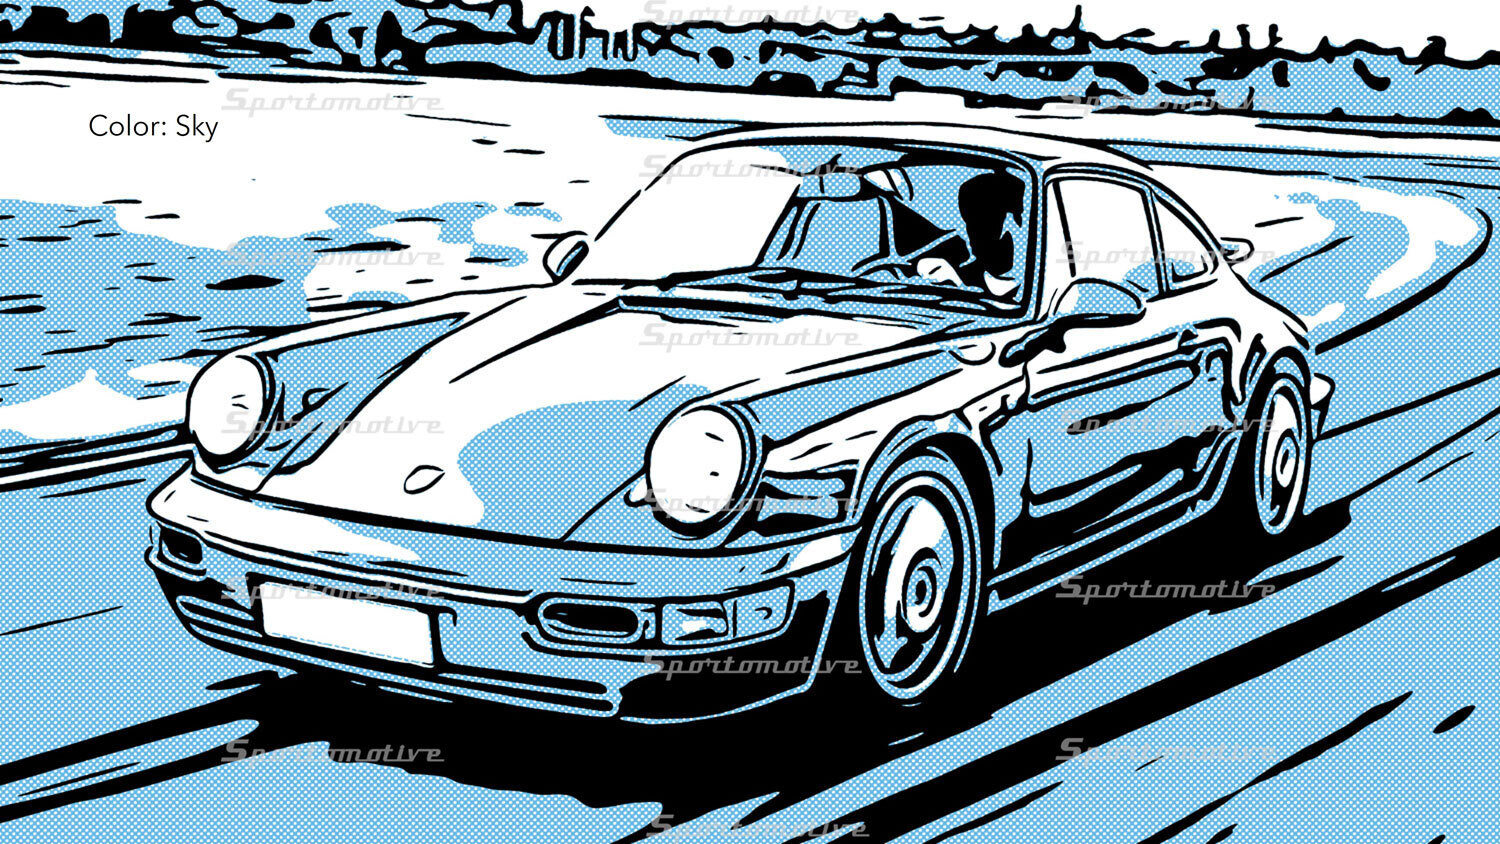 Hommage to a 'true modern Classic': the Porsche 964 - Color Series